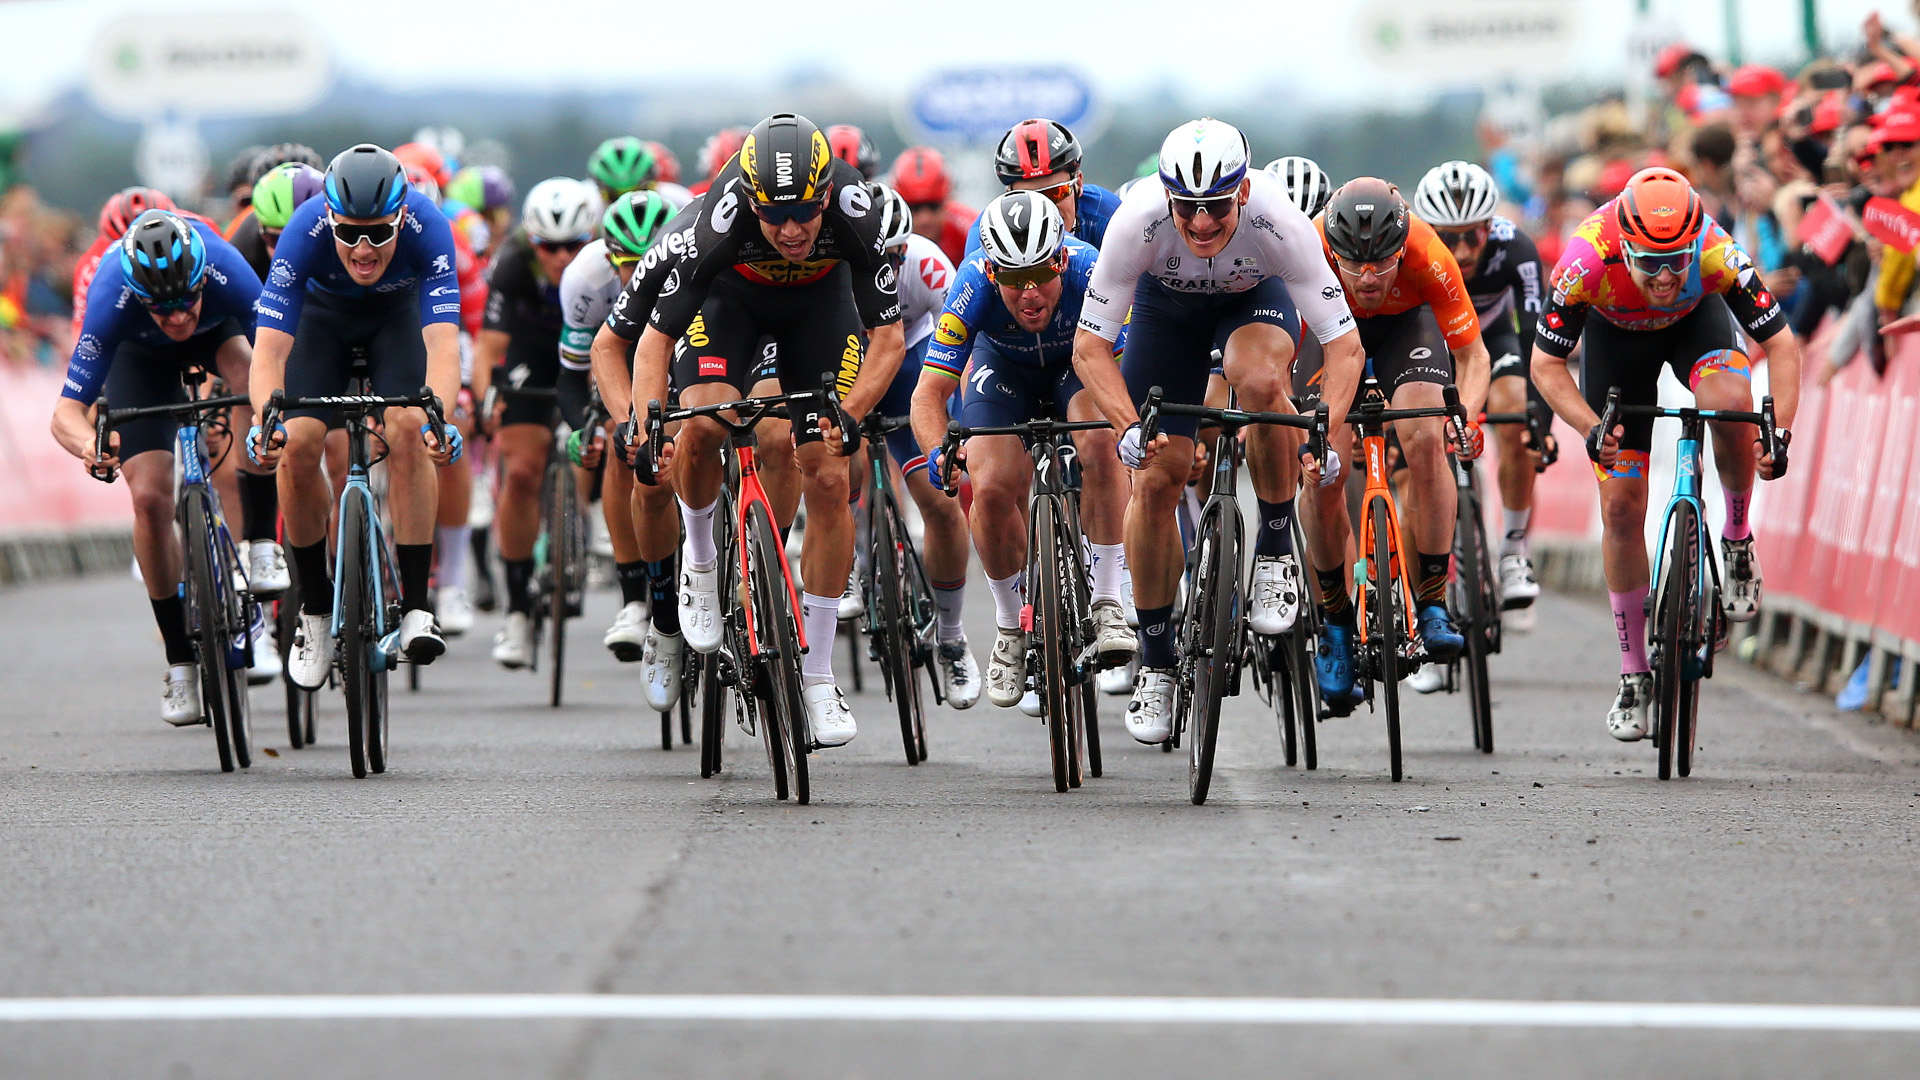 Tour of Britain live stream how to watch all cycling stages online from anywhere